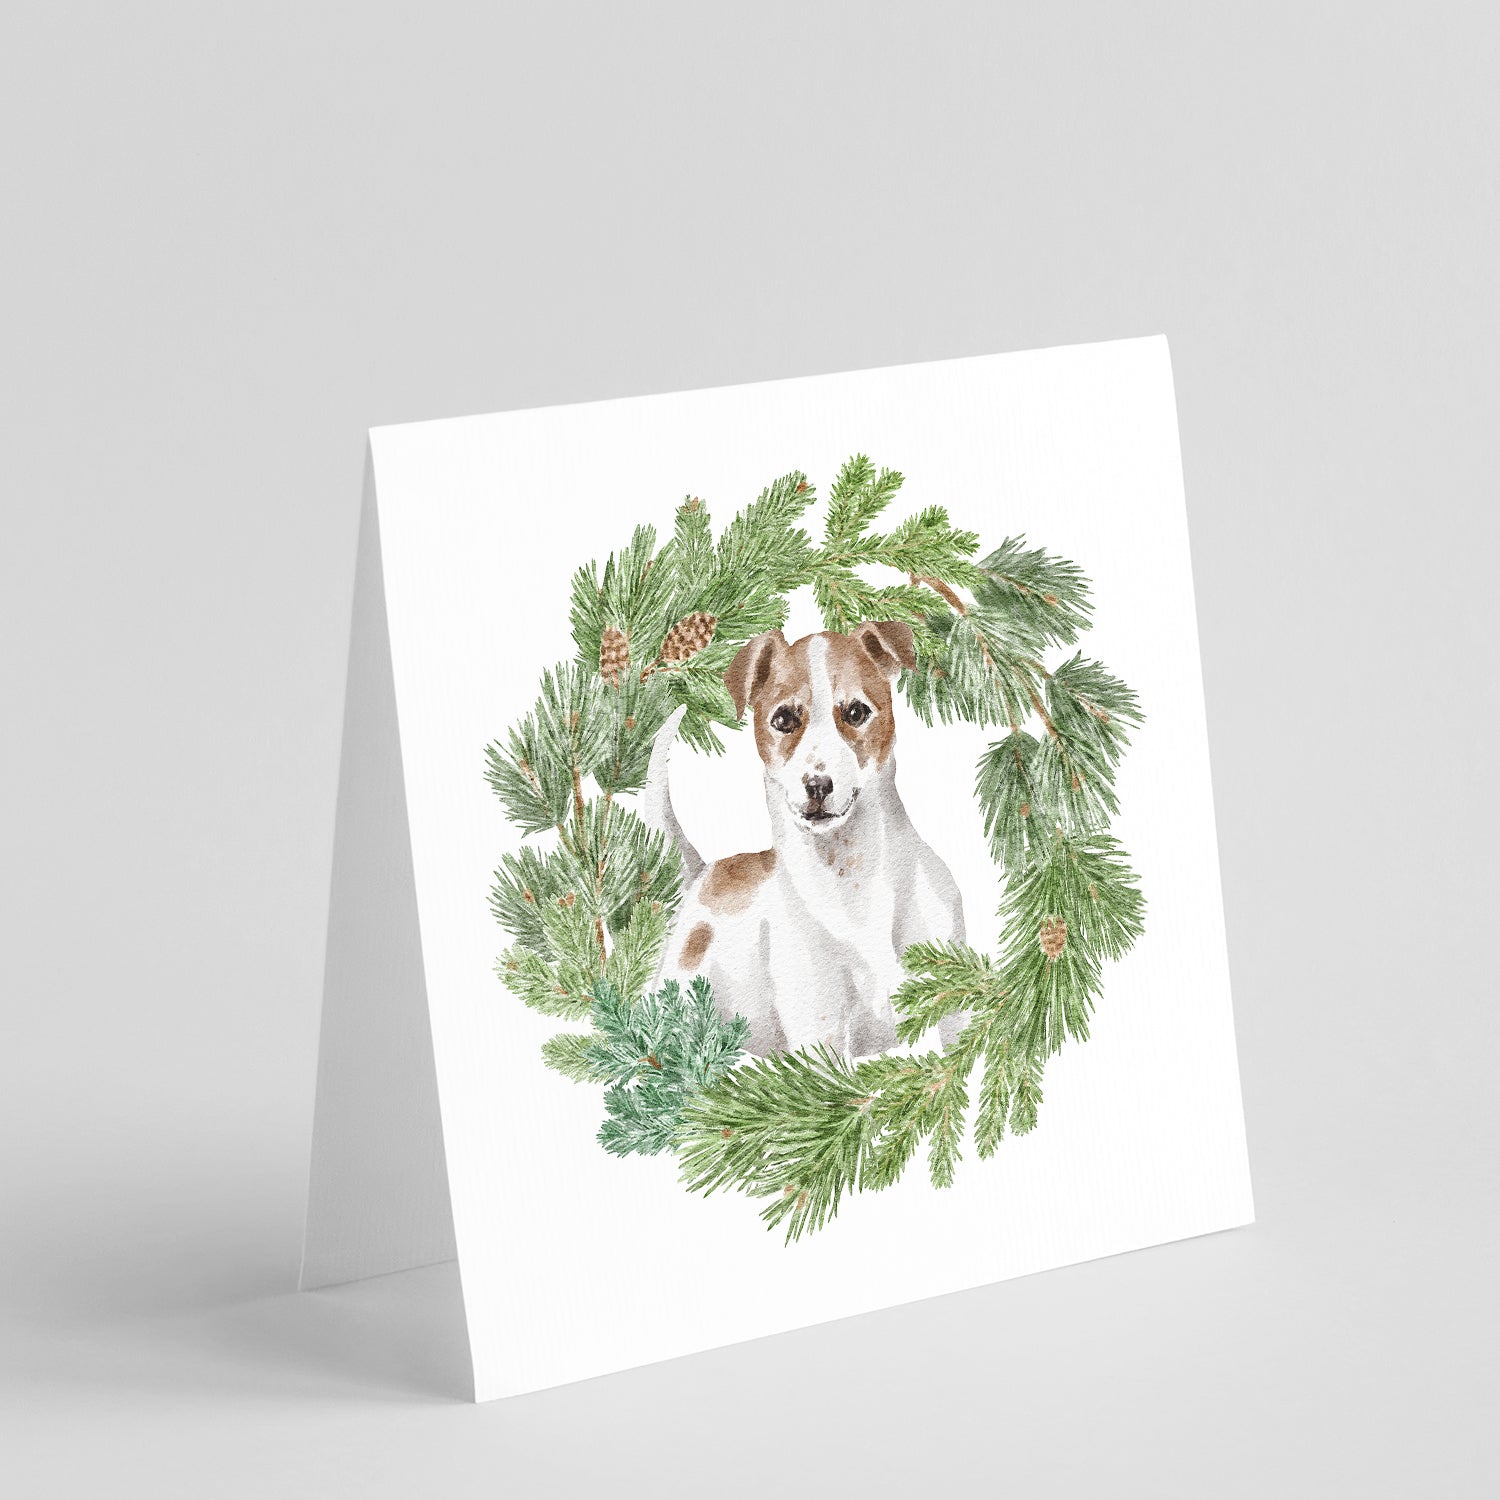 Jack Russell Terrier Chestnut and White with Christmas Wreath